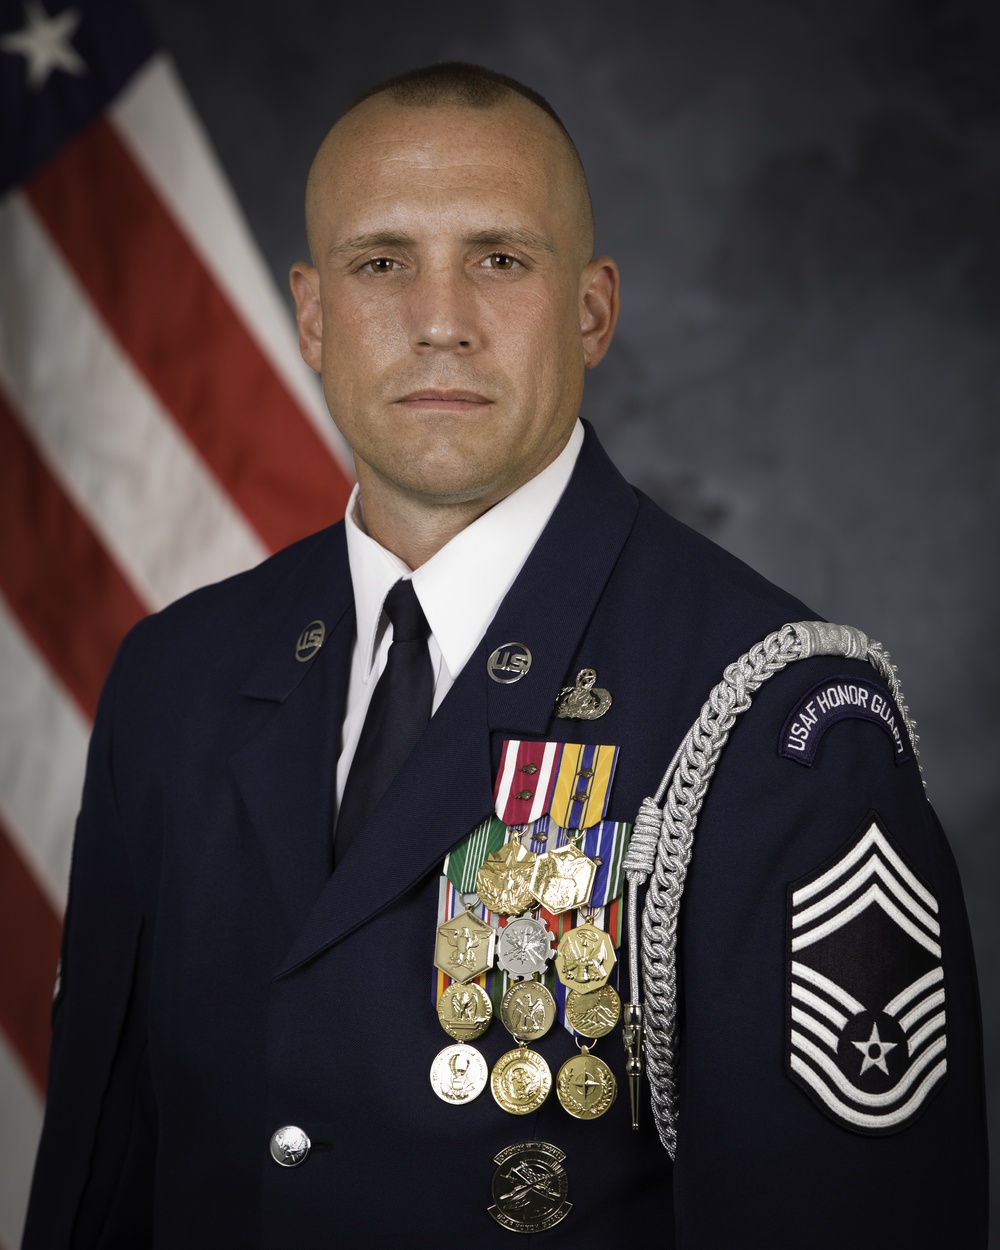 Official portrait, Chief Enlisted Manager, The US Air Force Honor Guard, Chief Master Sgt. William S. Rose, US Air Force